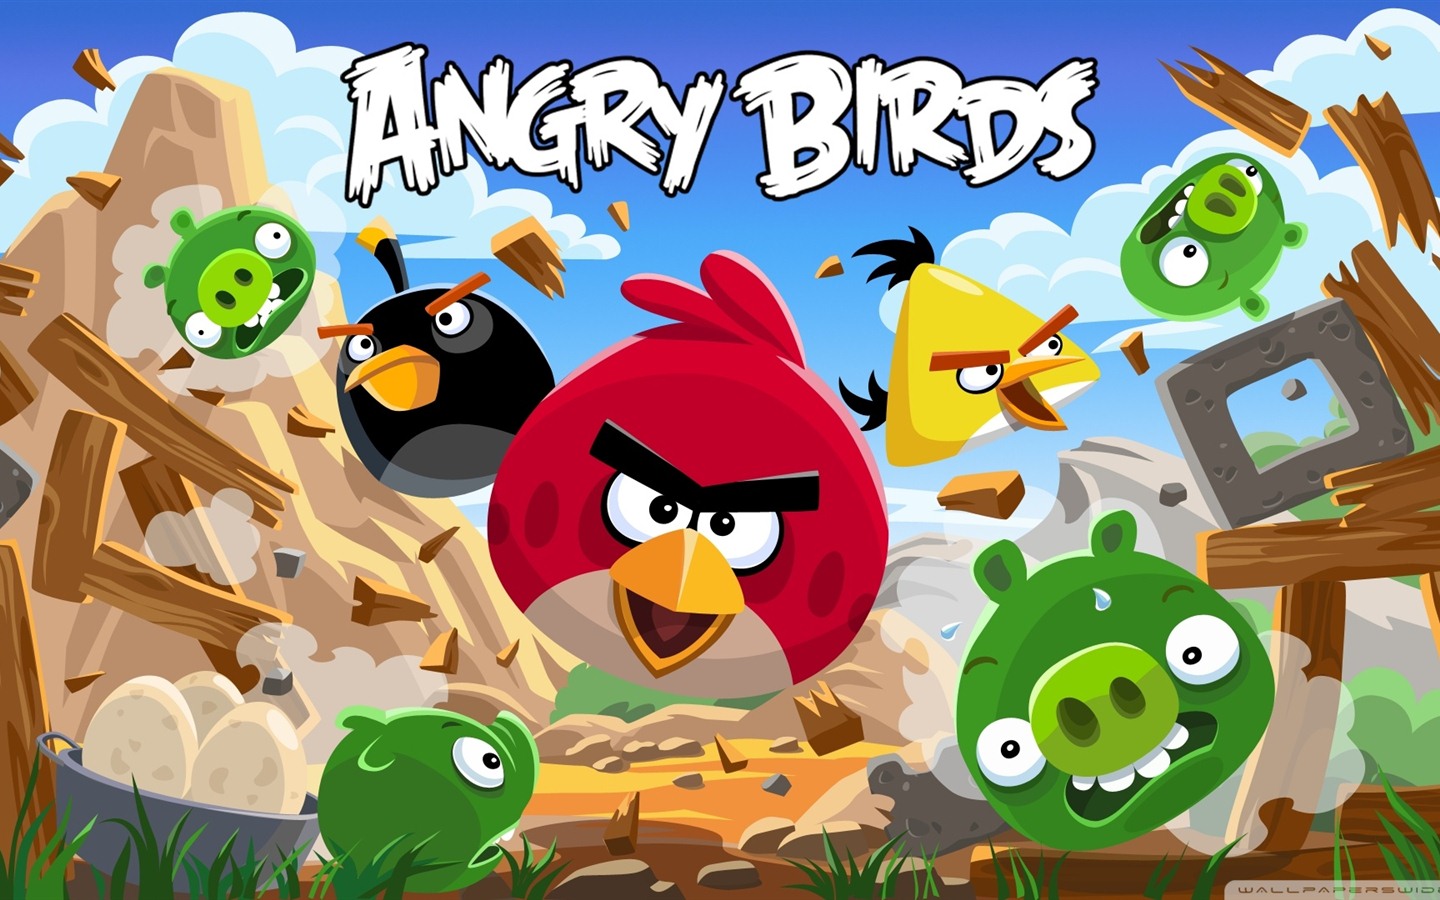 Angry Birds Spiel wallpapers #10 - 1440x900